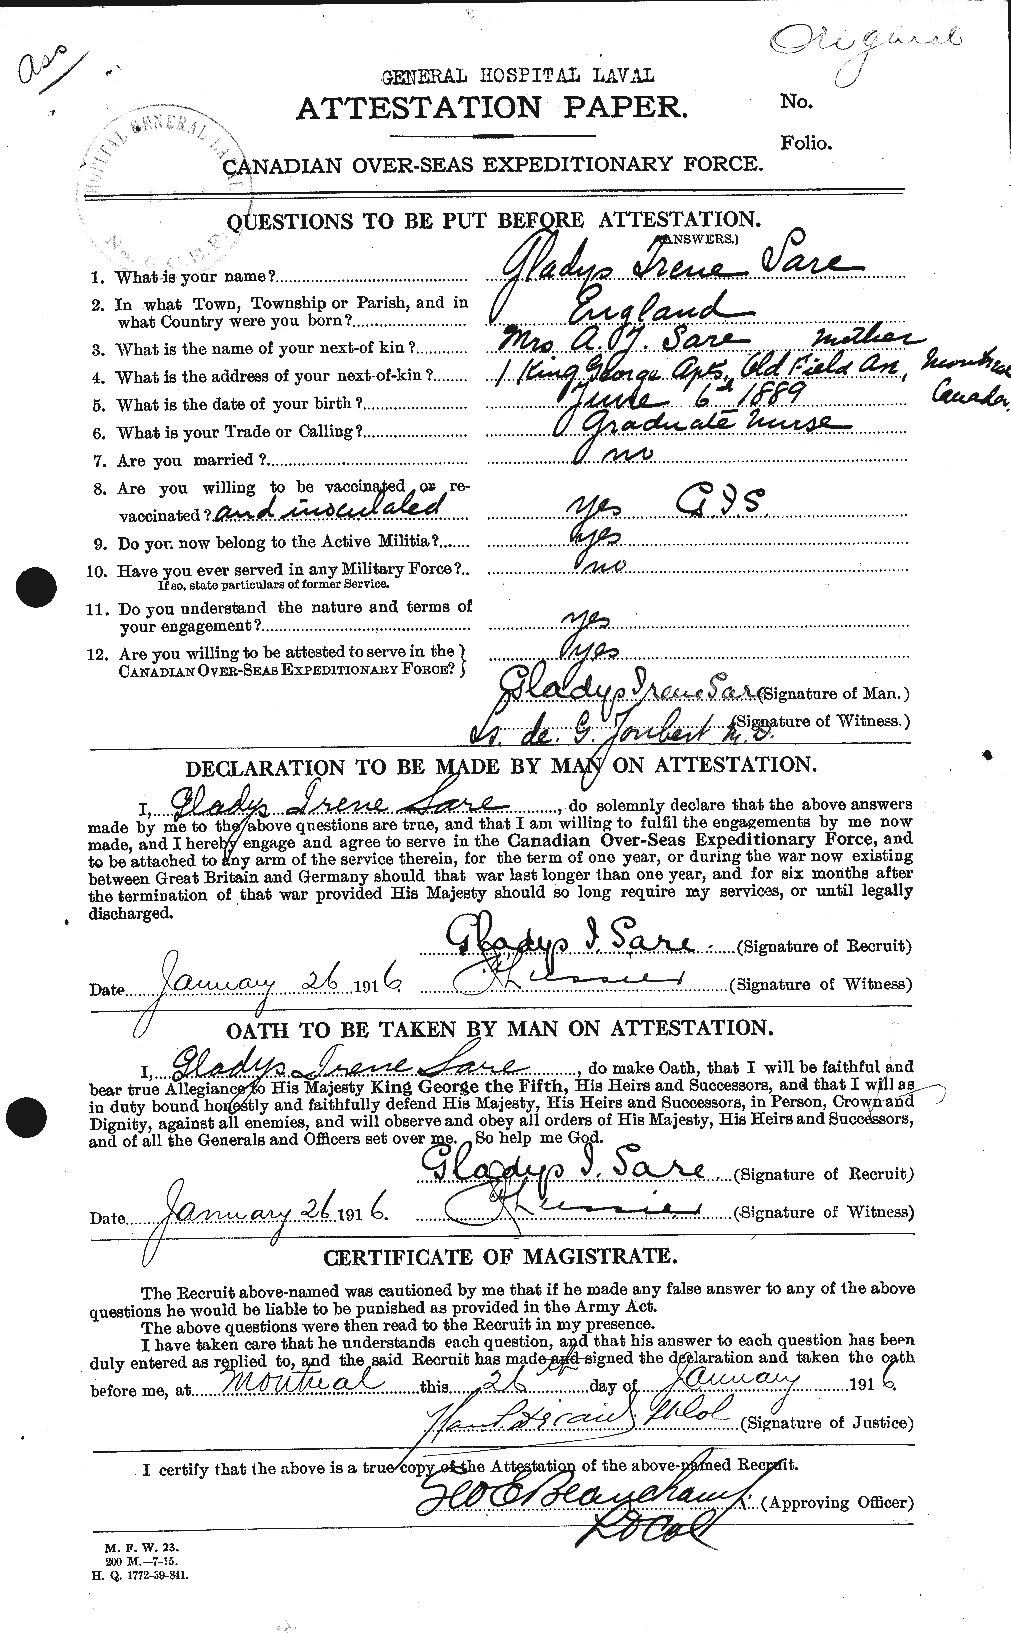 Personnel Records of the First World War - CEF 079795a